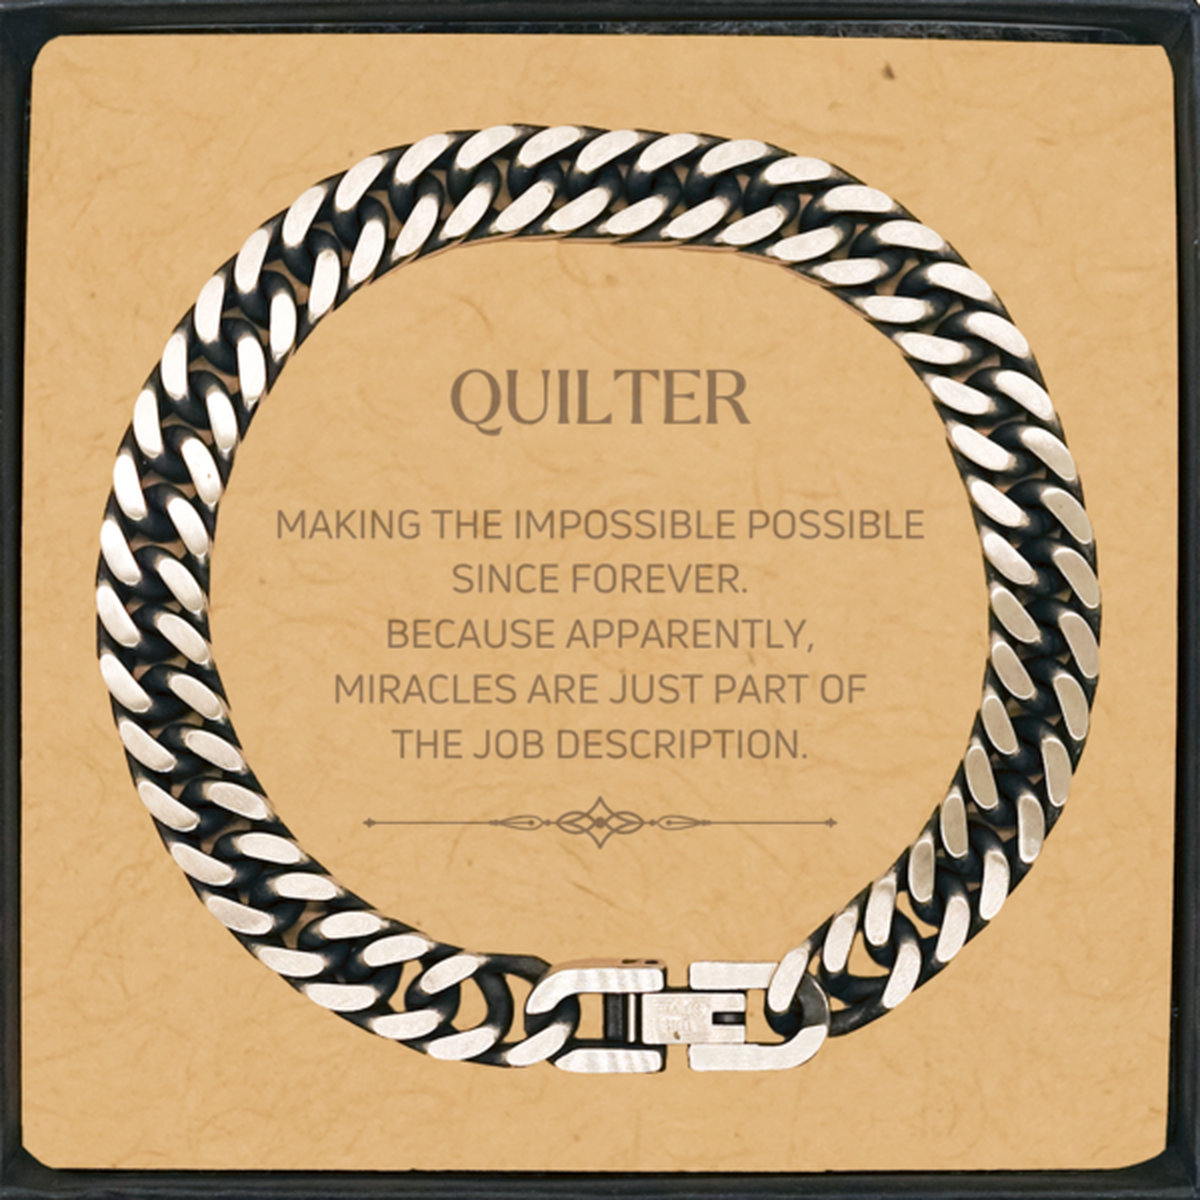 Funny Quilter Gifts, Miracles are just part of the job description, Inspirational Birthday Cuban Link Chain Bracelet For Quilter, Men, Women, Coworkers, Friends, Boss